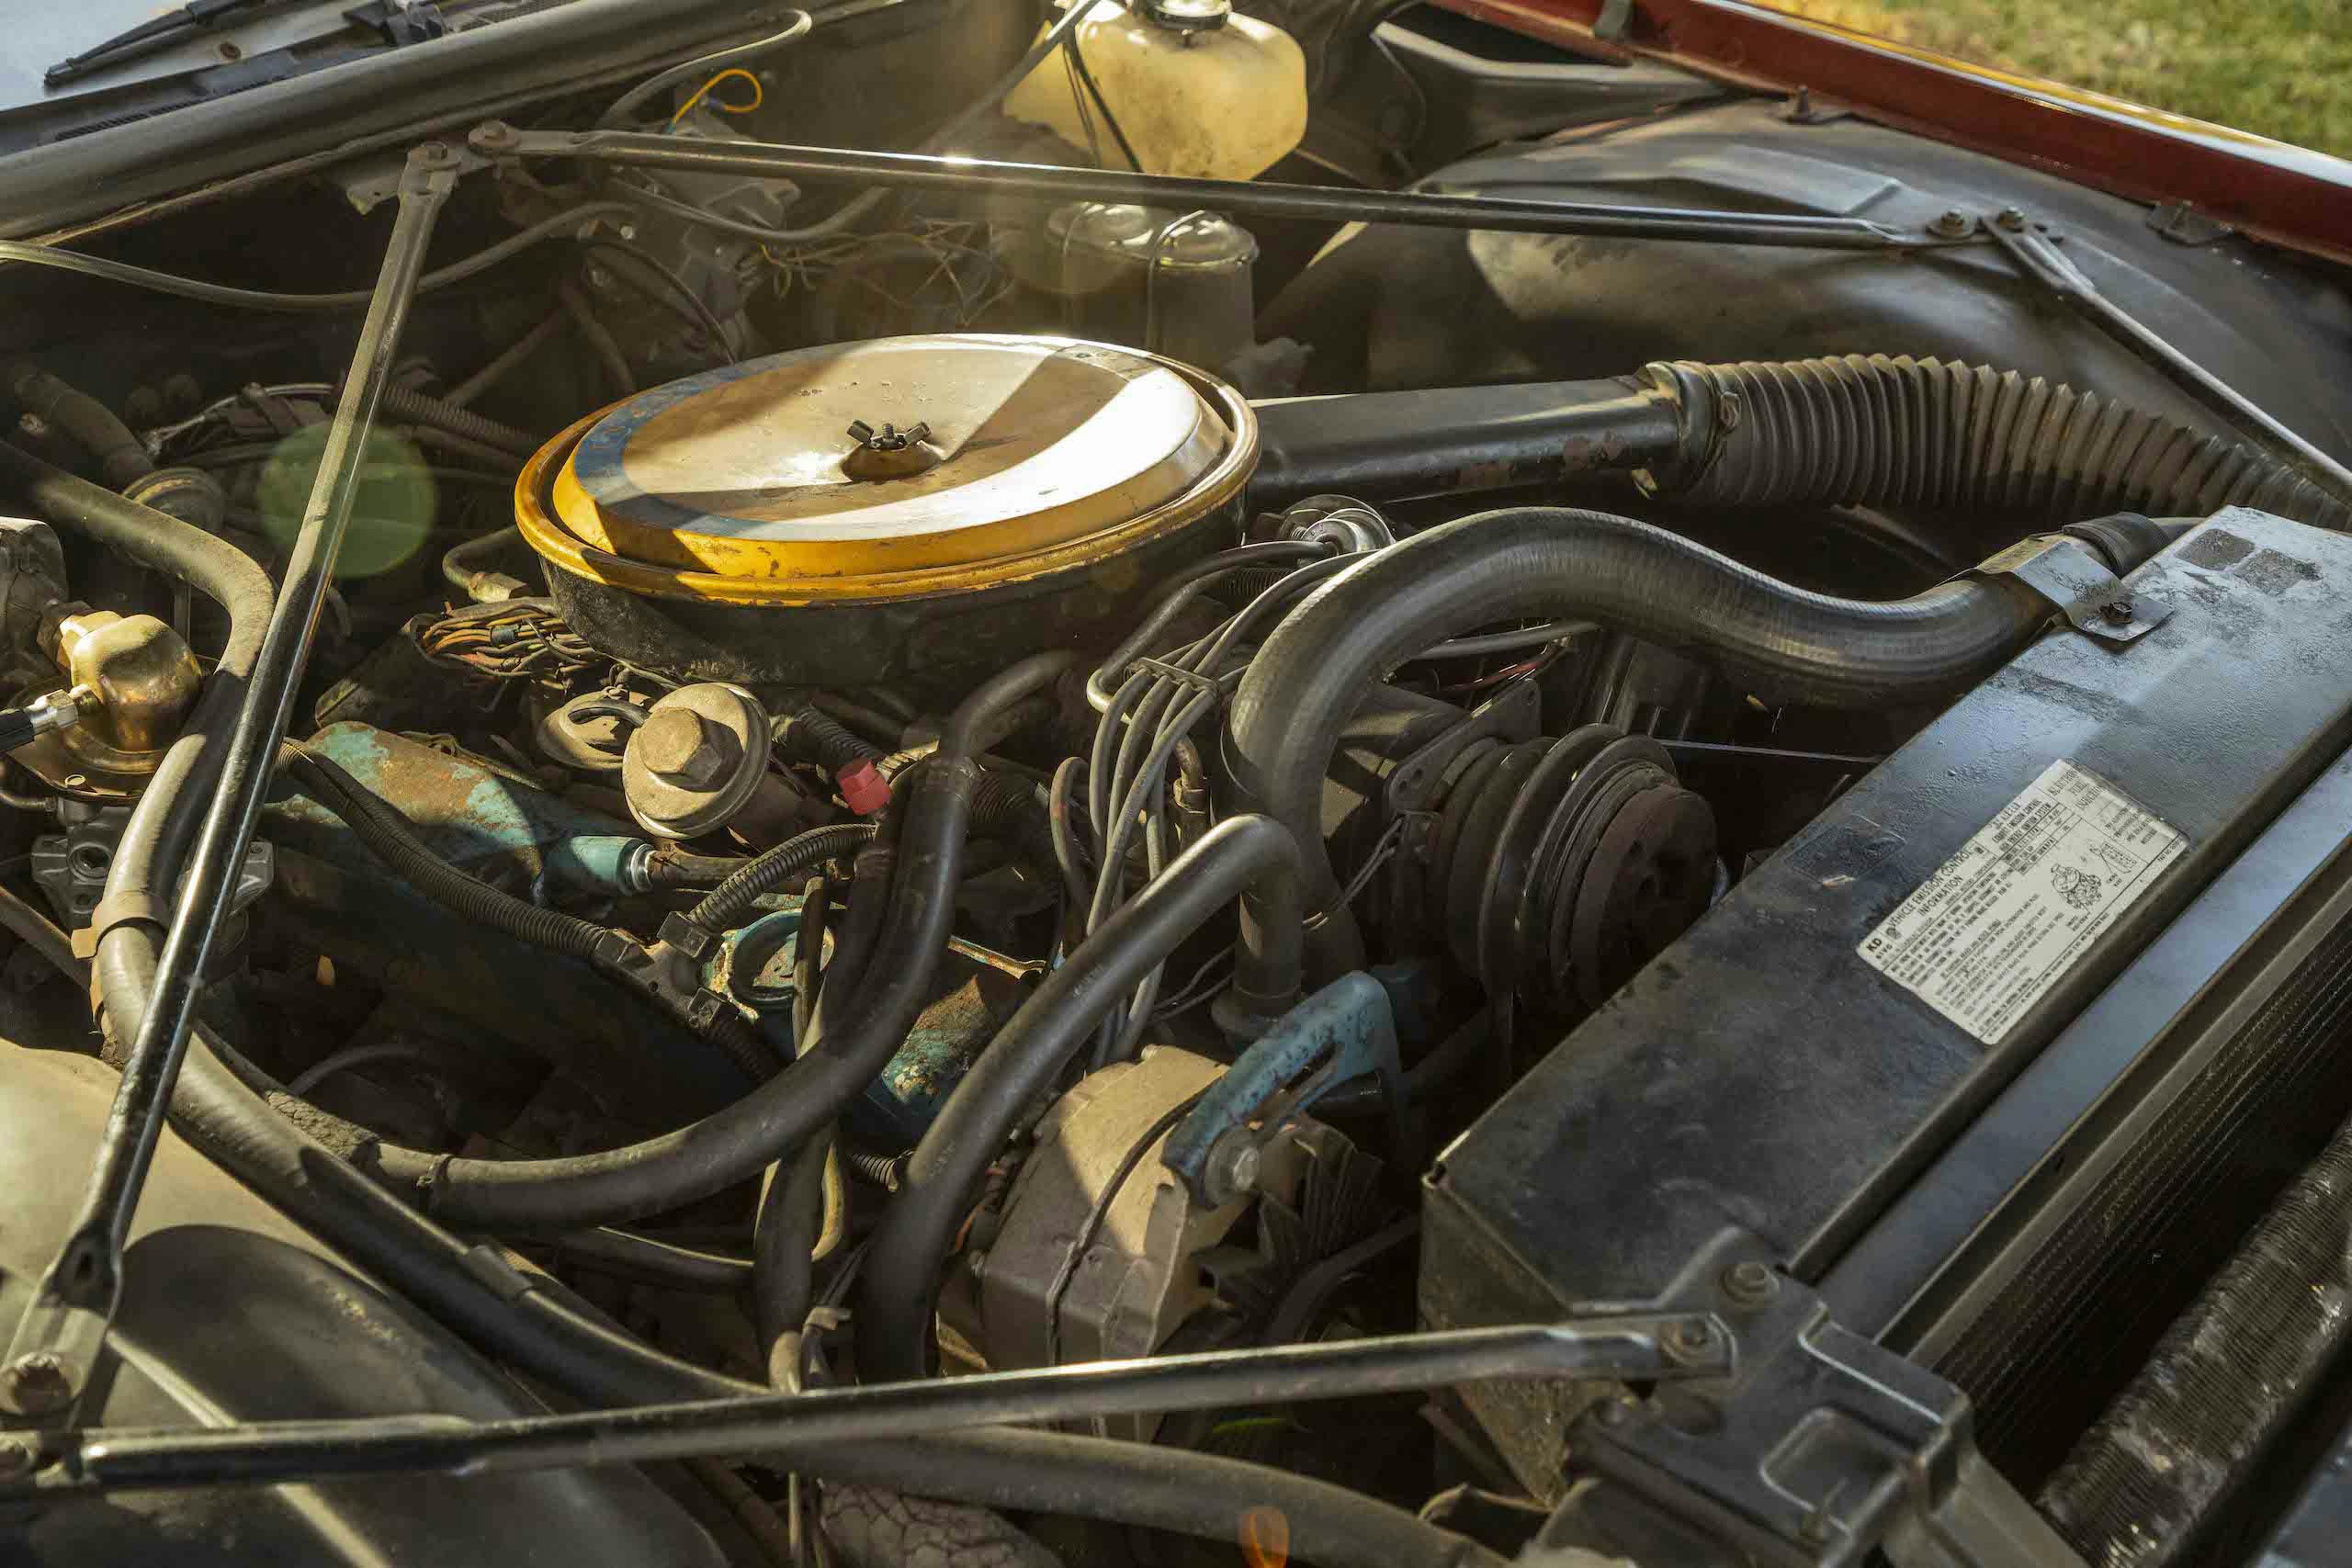 1976 Cadillac Coupe DeVille engine